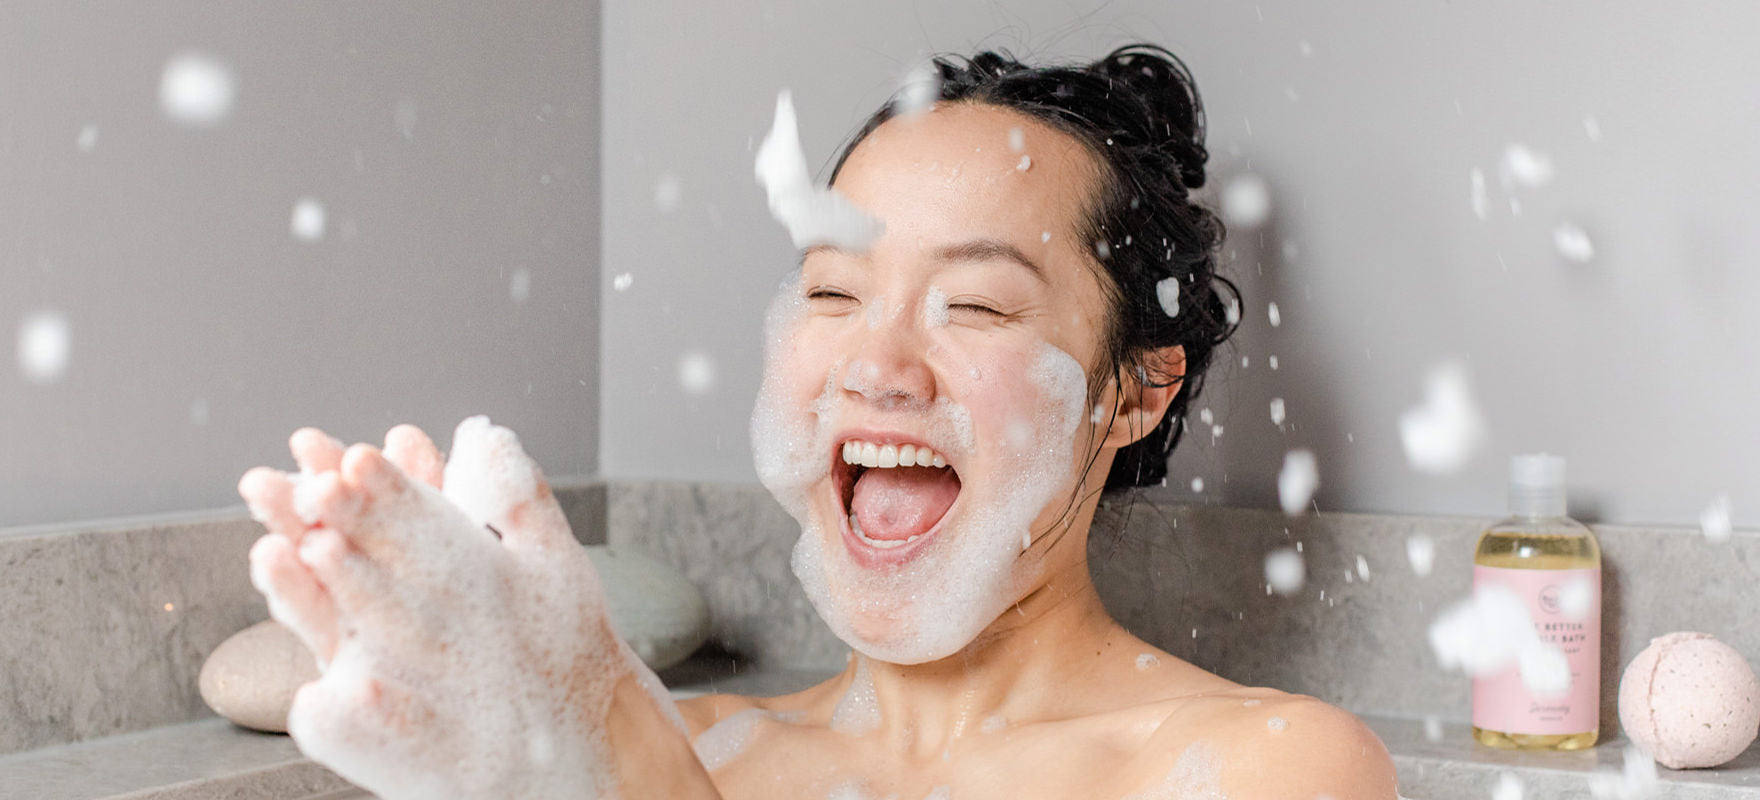 Woman laughing and clapping her hand throwing bubbles everywhere in the bath using SLS-free all-natural bubble bath from Rocky Mountain Soap Company